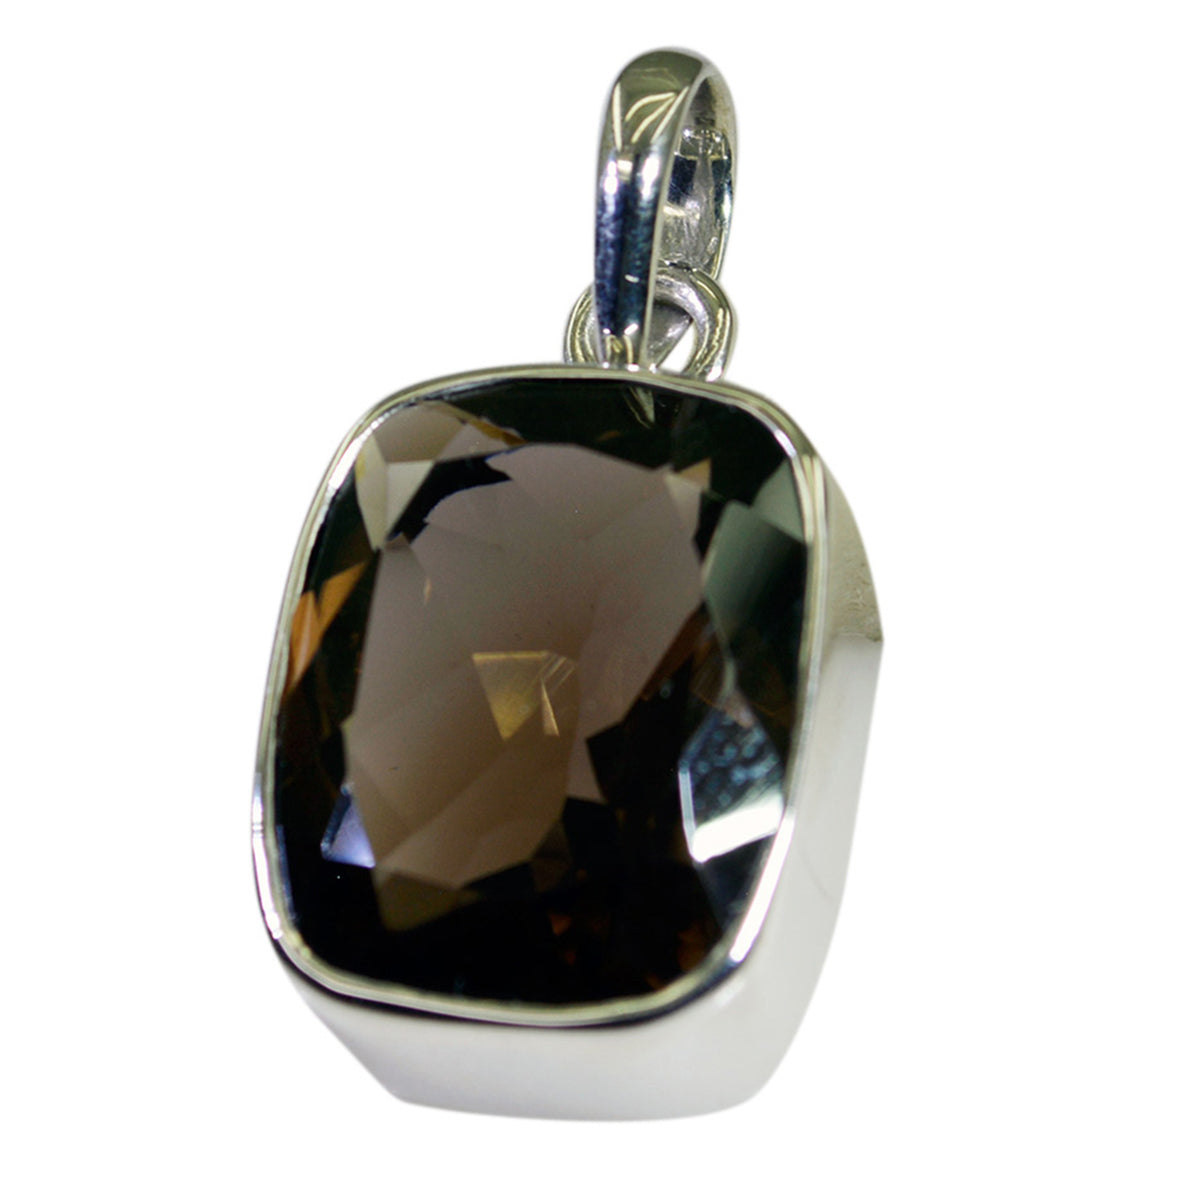 Riyo Real Gemstones Octogon Faceted Brown smoky quartz Solid Silver Pendant gift fordaughter day